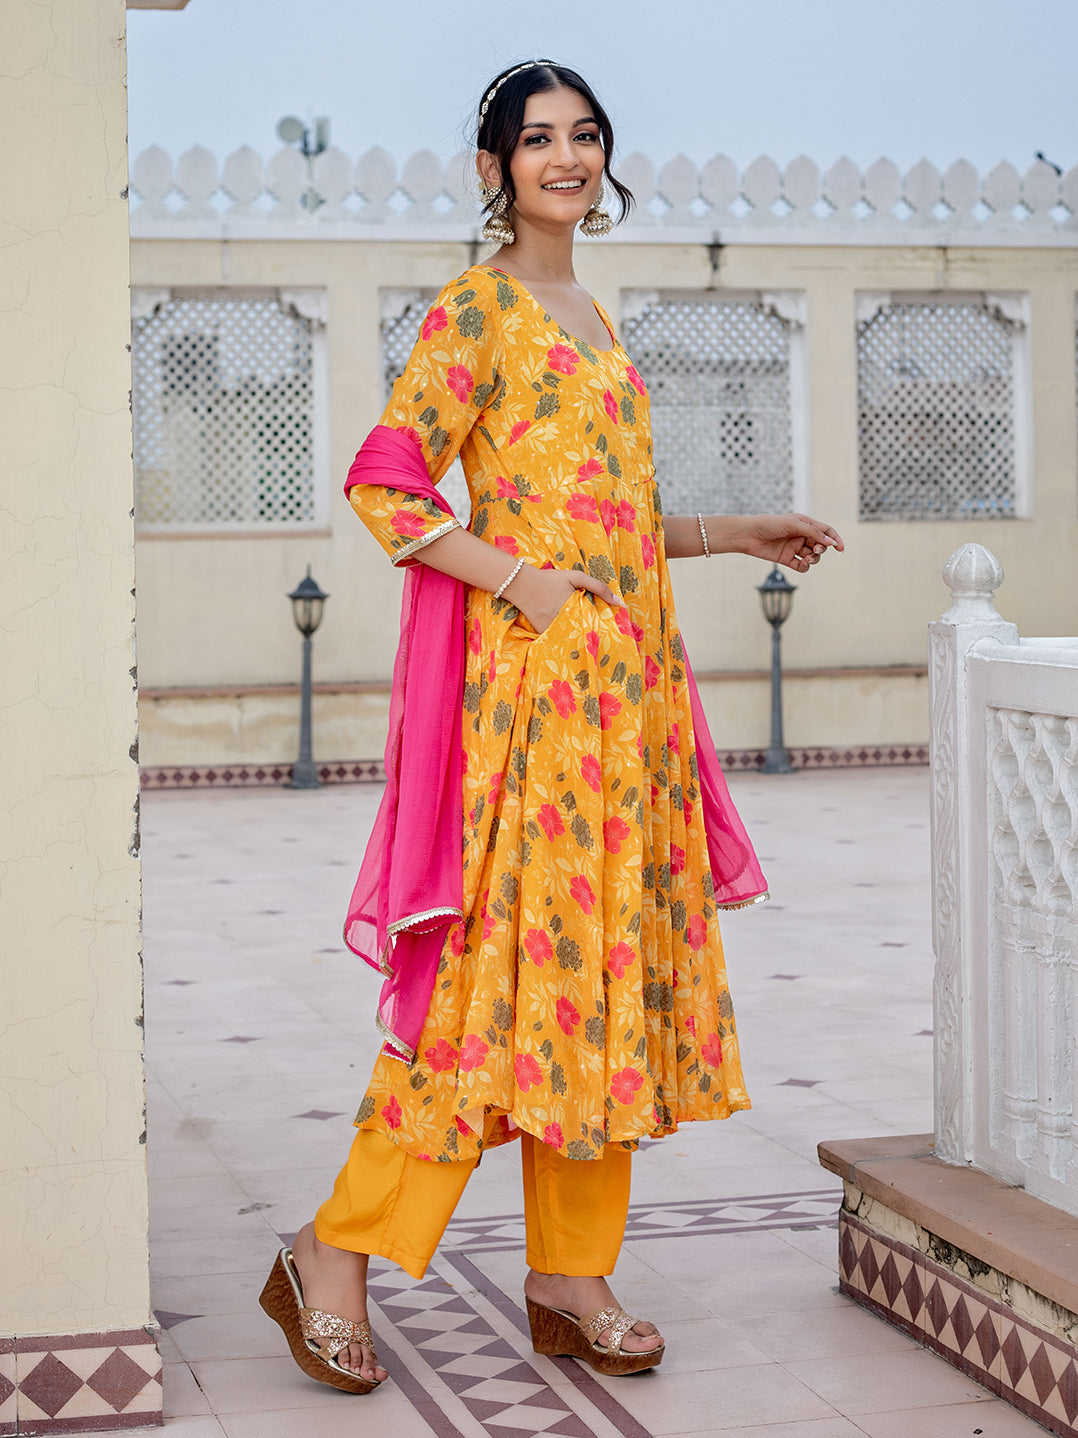 elegance-meets-vibrance-in-our-mustard-yellow-floral-jaal-printed-anarkali-set-a-fusion-of-tradition-and-style-perfect-for-a-timeless-statement